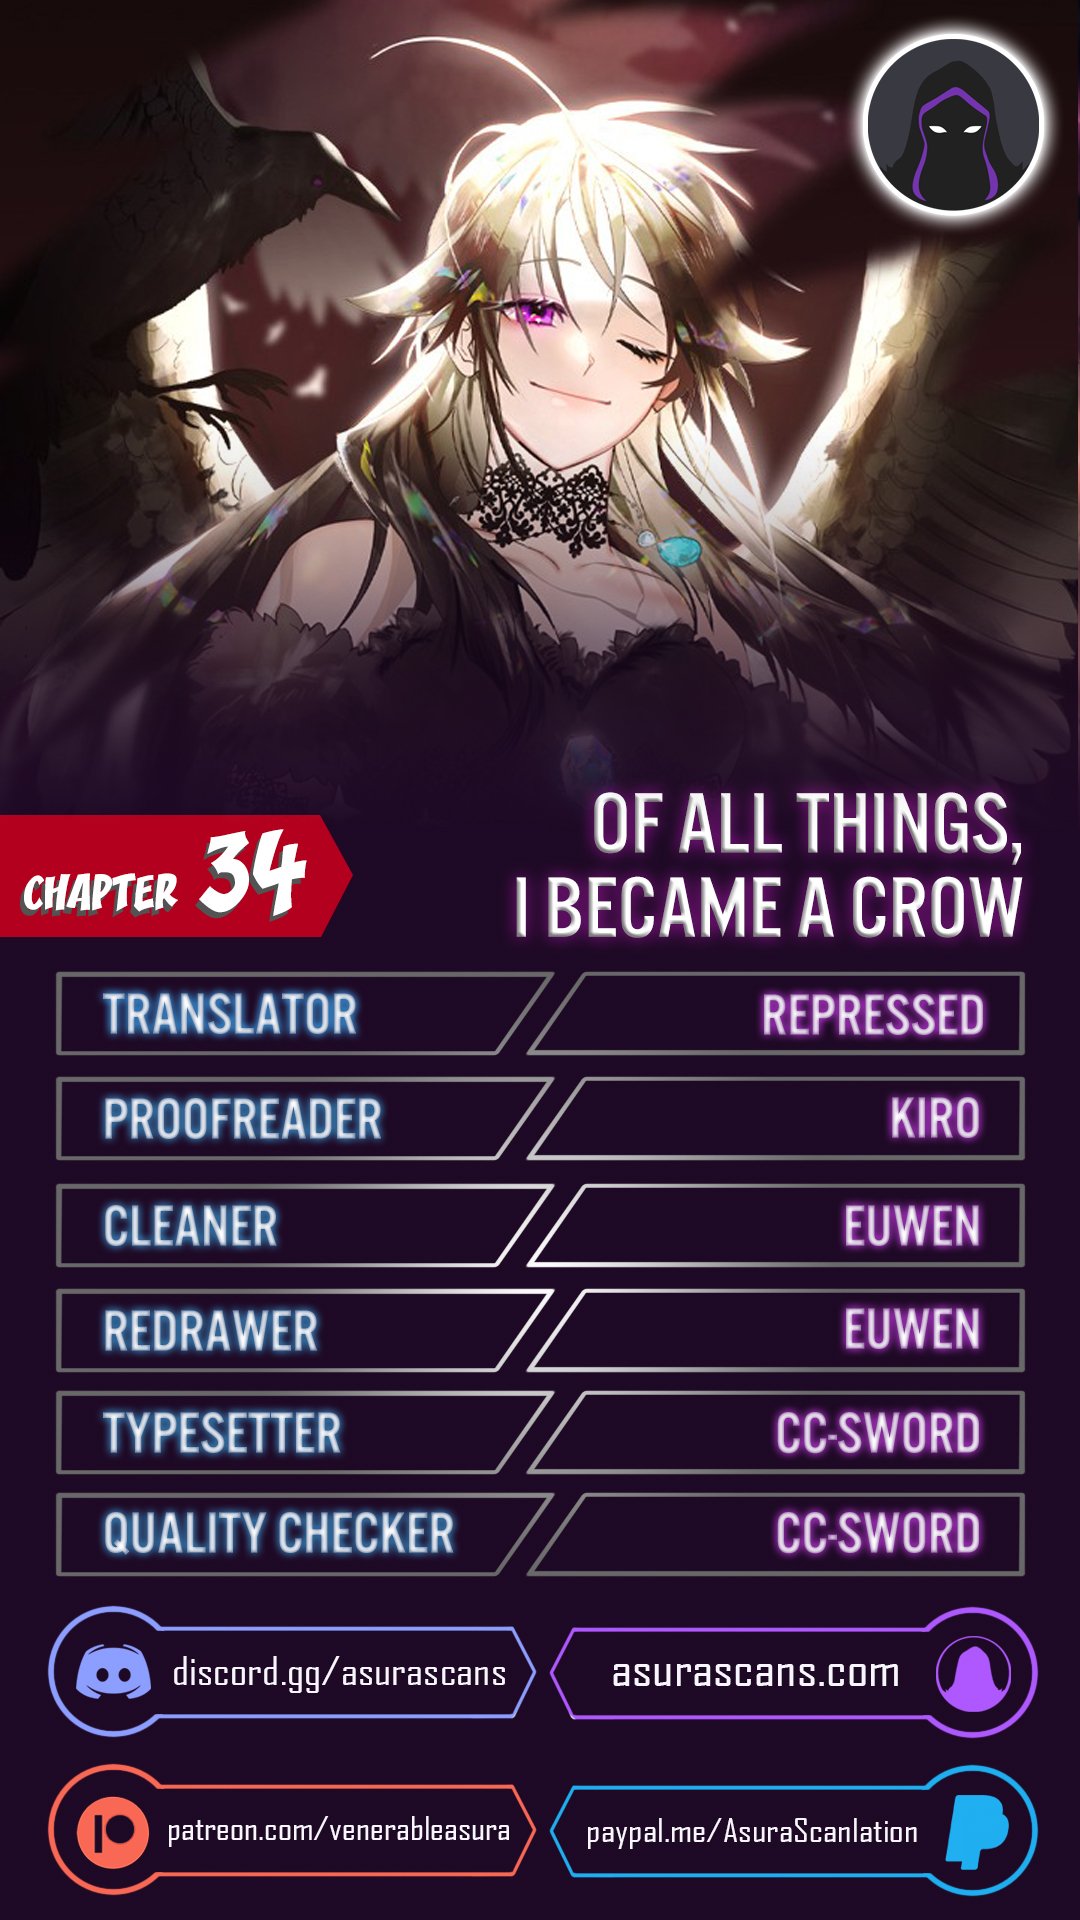 Of All Things, I Became a Crow - Chapter 21086 - Image 1